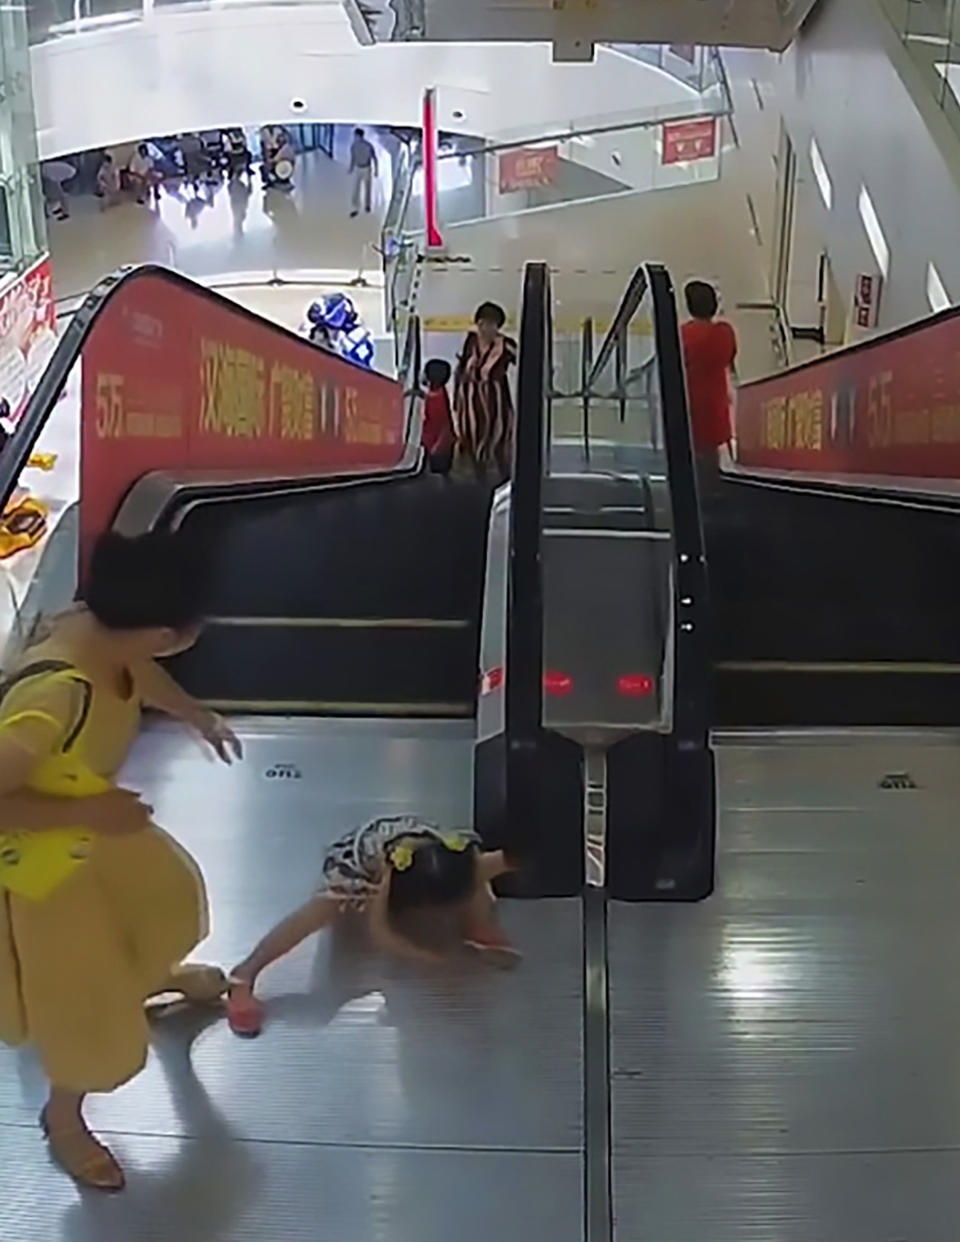 A young girl's arm becomes stuck in a handrail of an escalator. Source: AsiaWire/Australscope